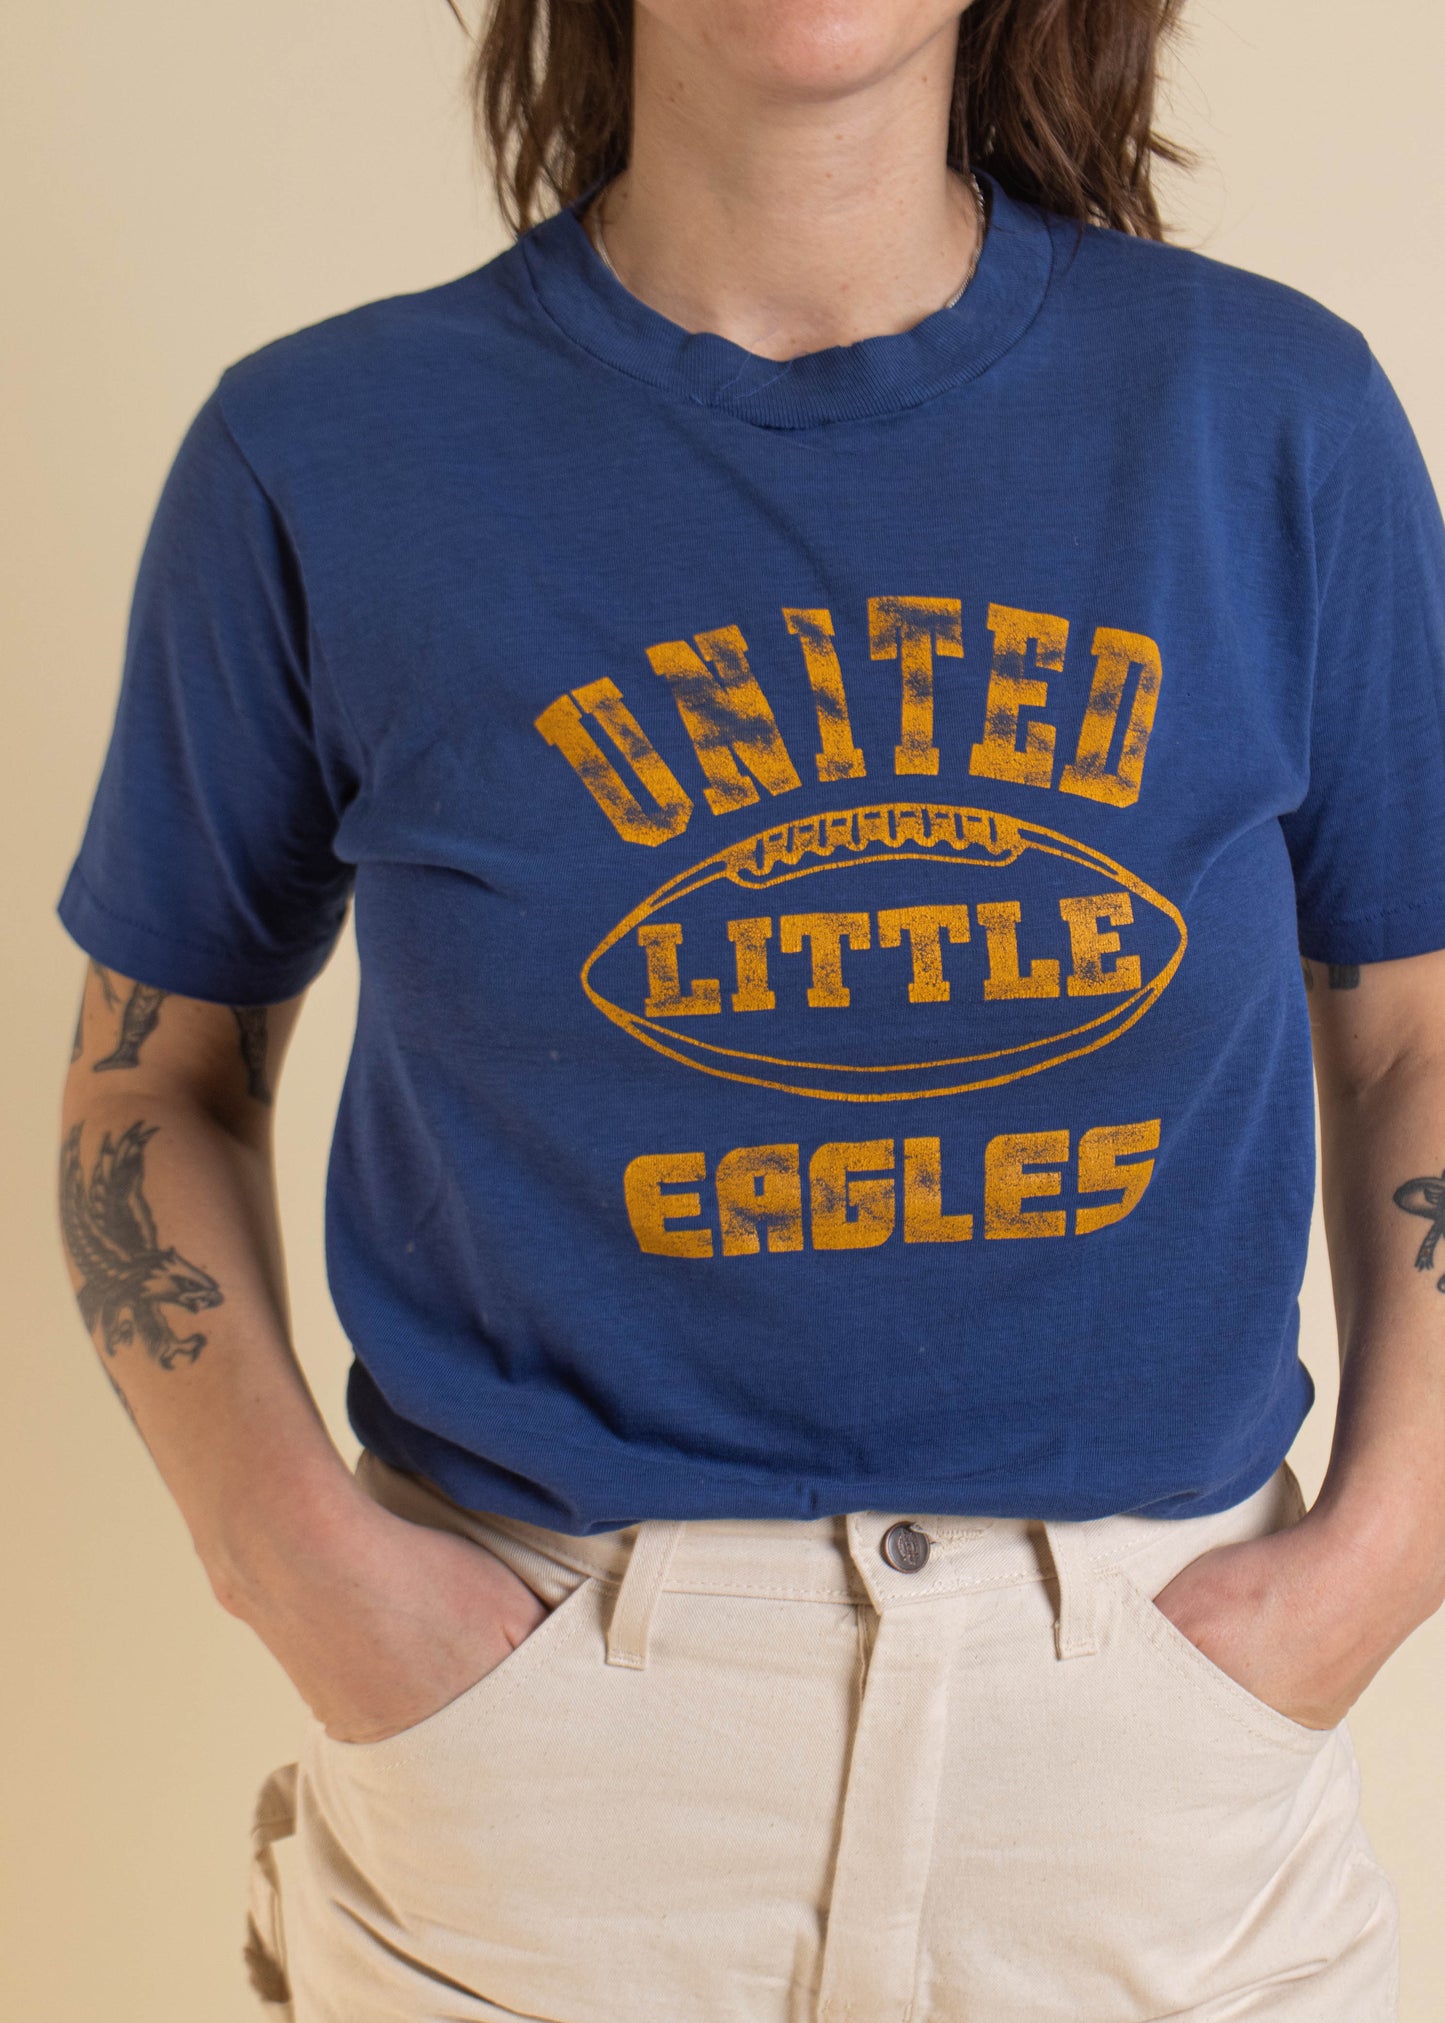 1970s United Little Eagles Football T-Shirt Size S/M